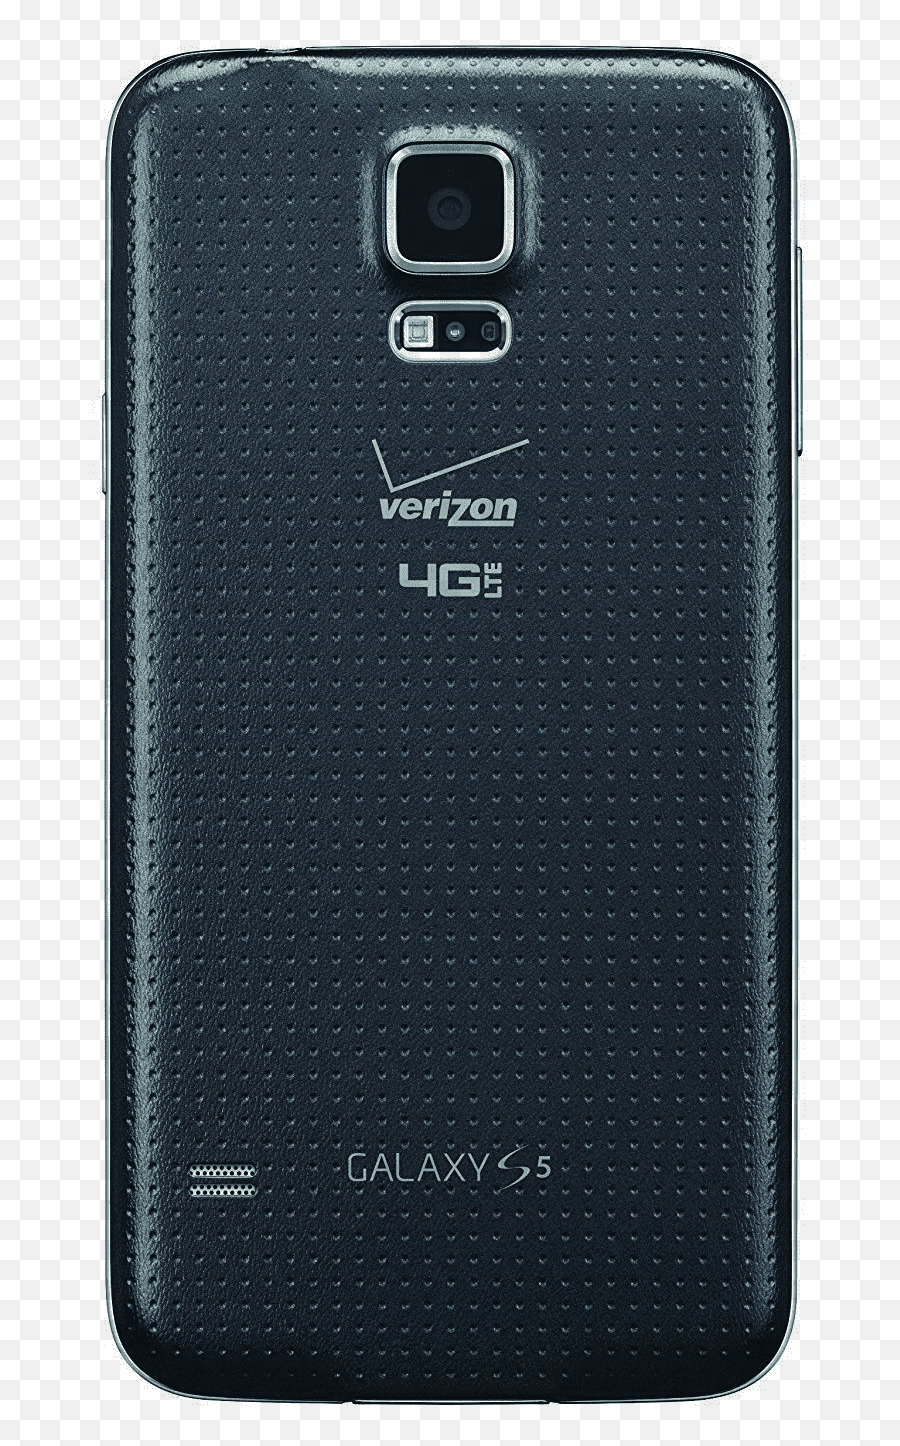 Samsung Galaxy S5 - Mobile Phone Case Emoji,How To Get Emojis On Galaxy S5 For Facebook